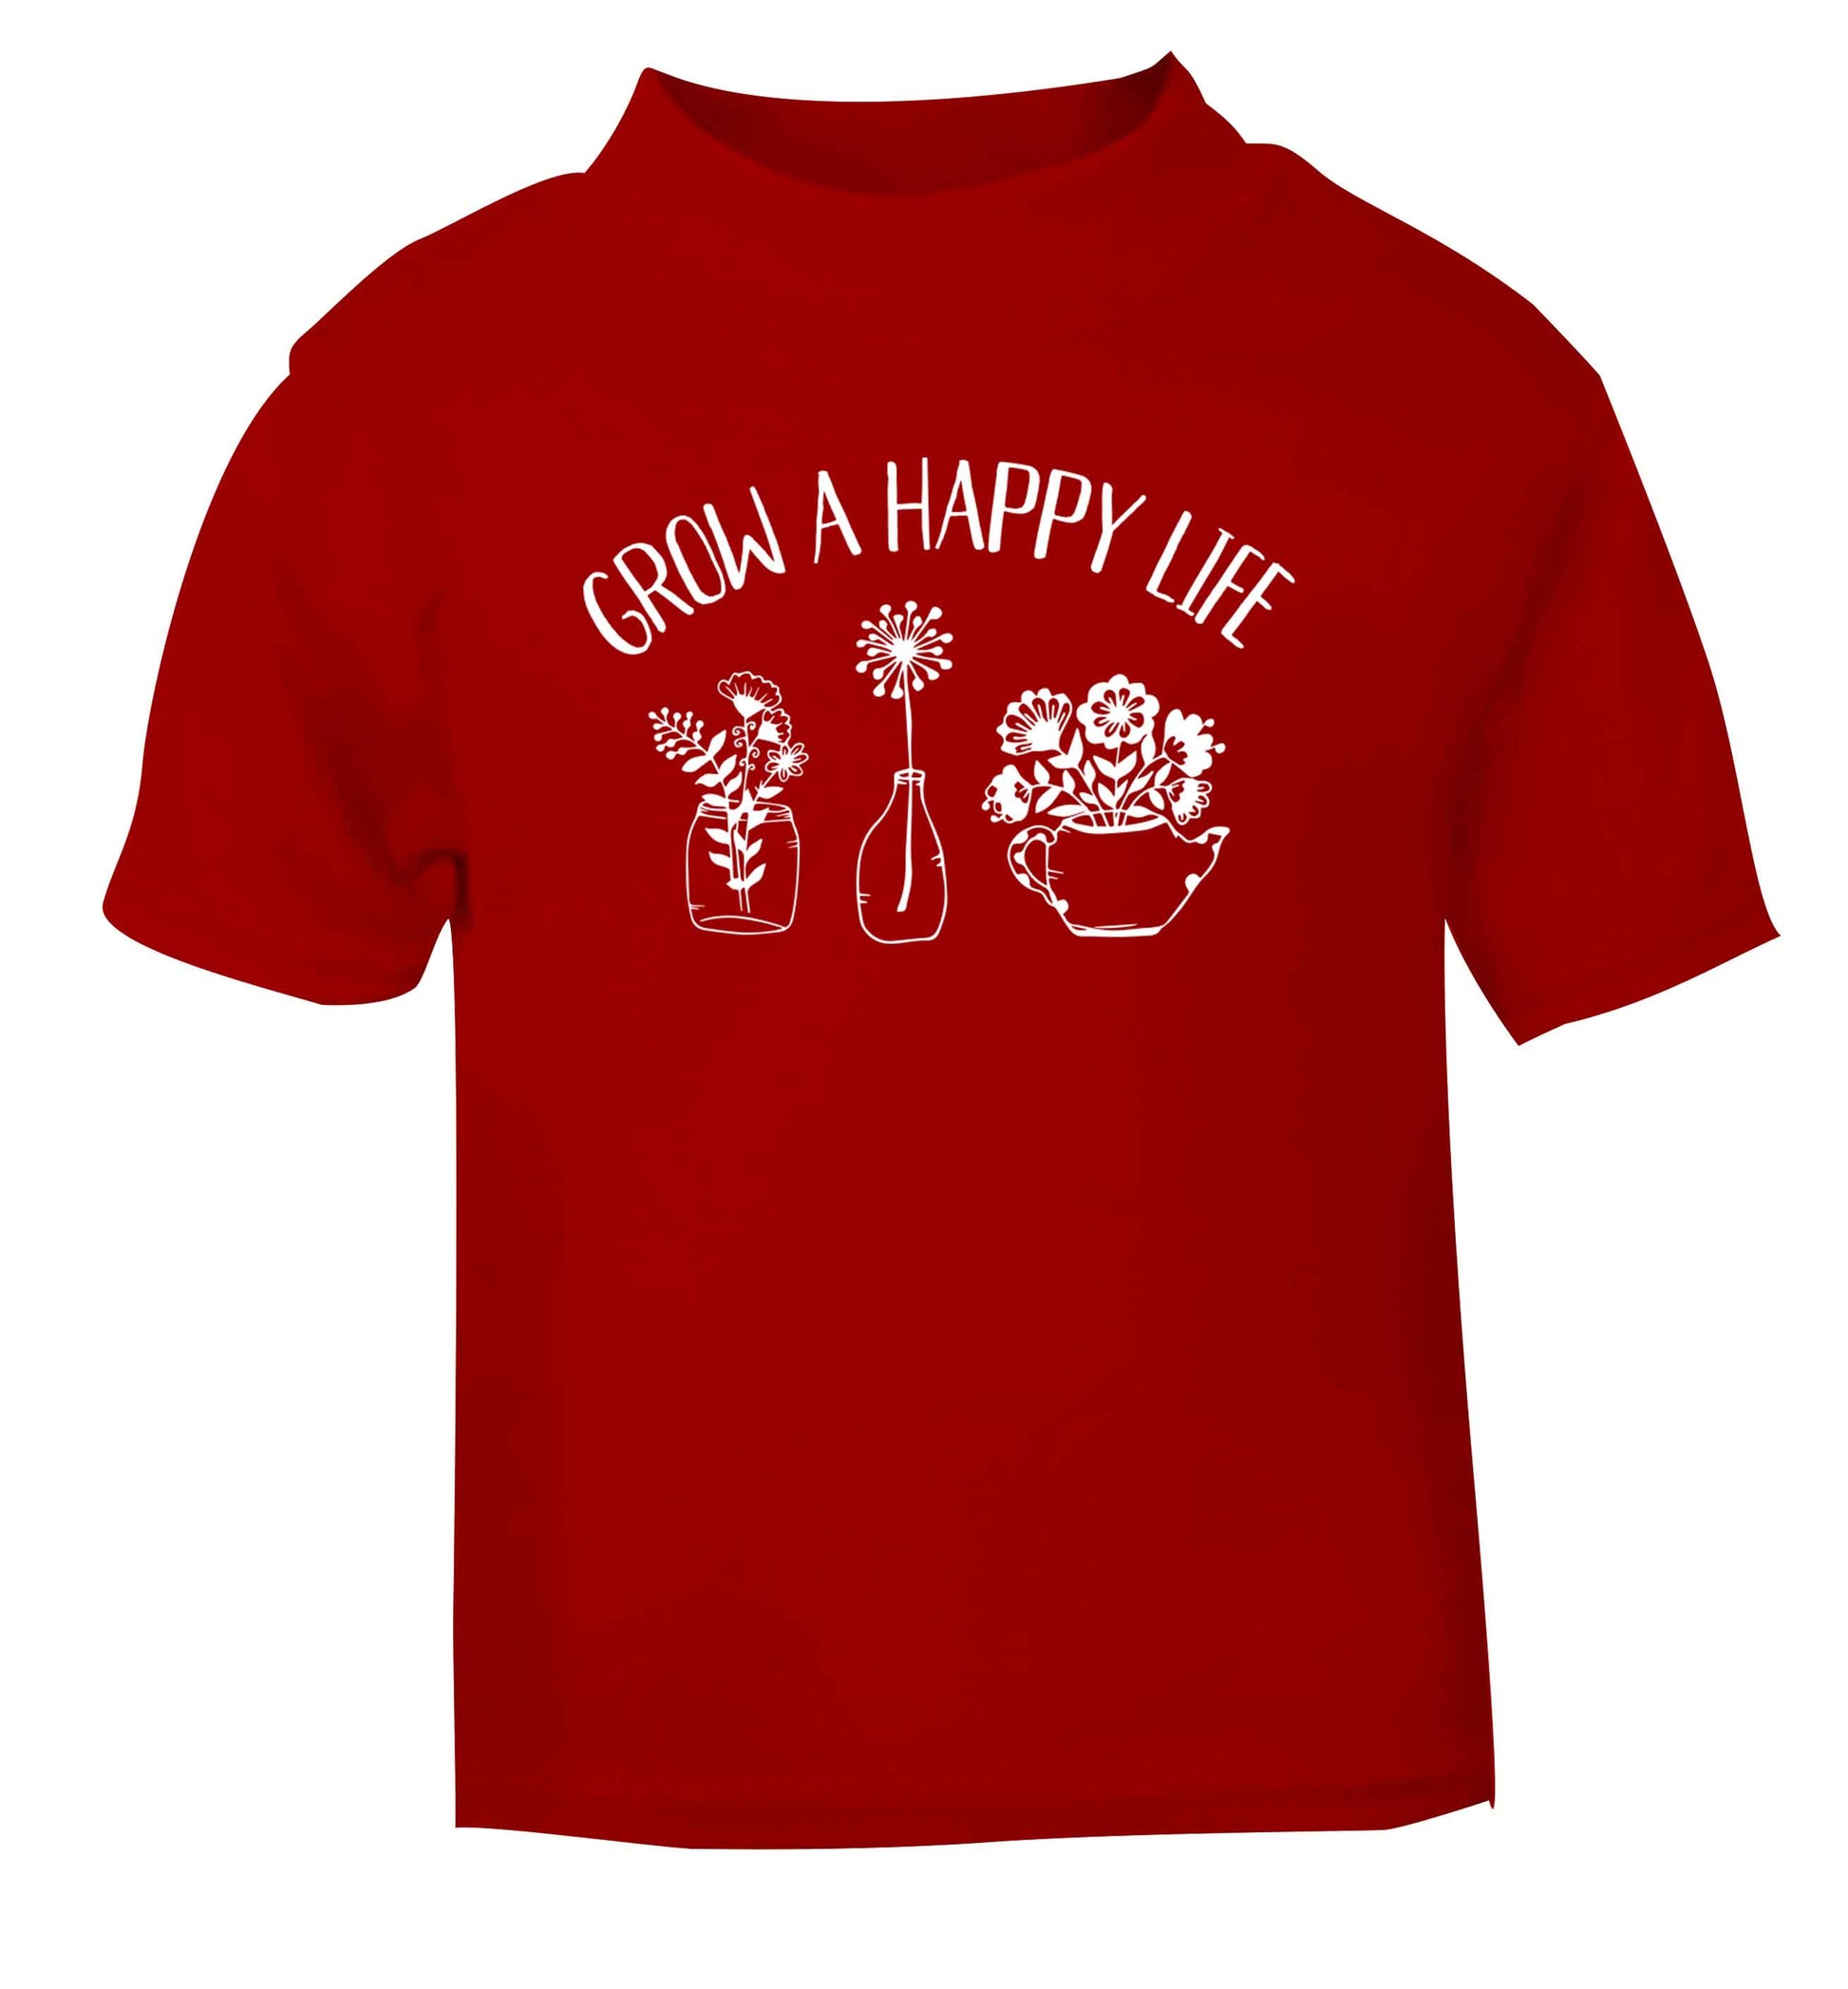 Grow a happy life red Baby Toddler Tshirt 2 Years